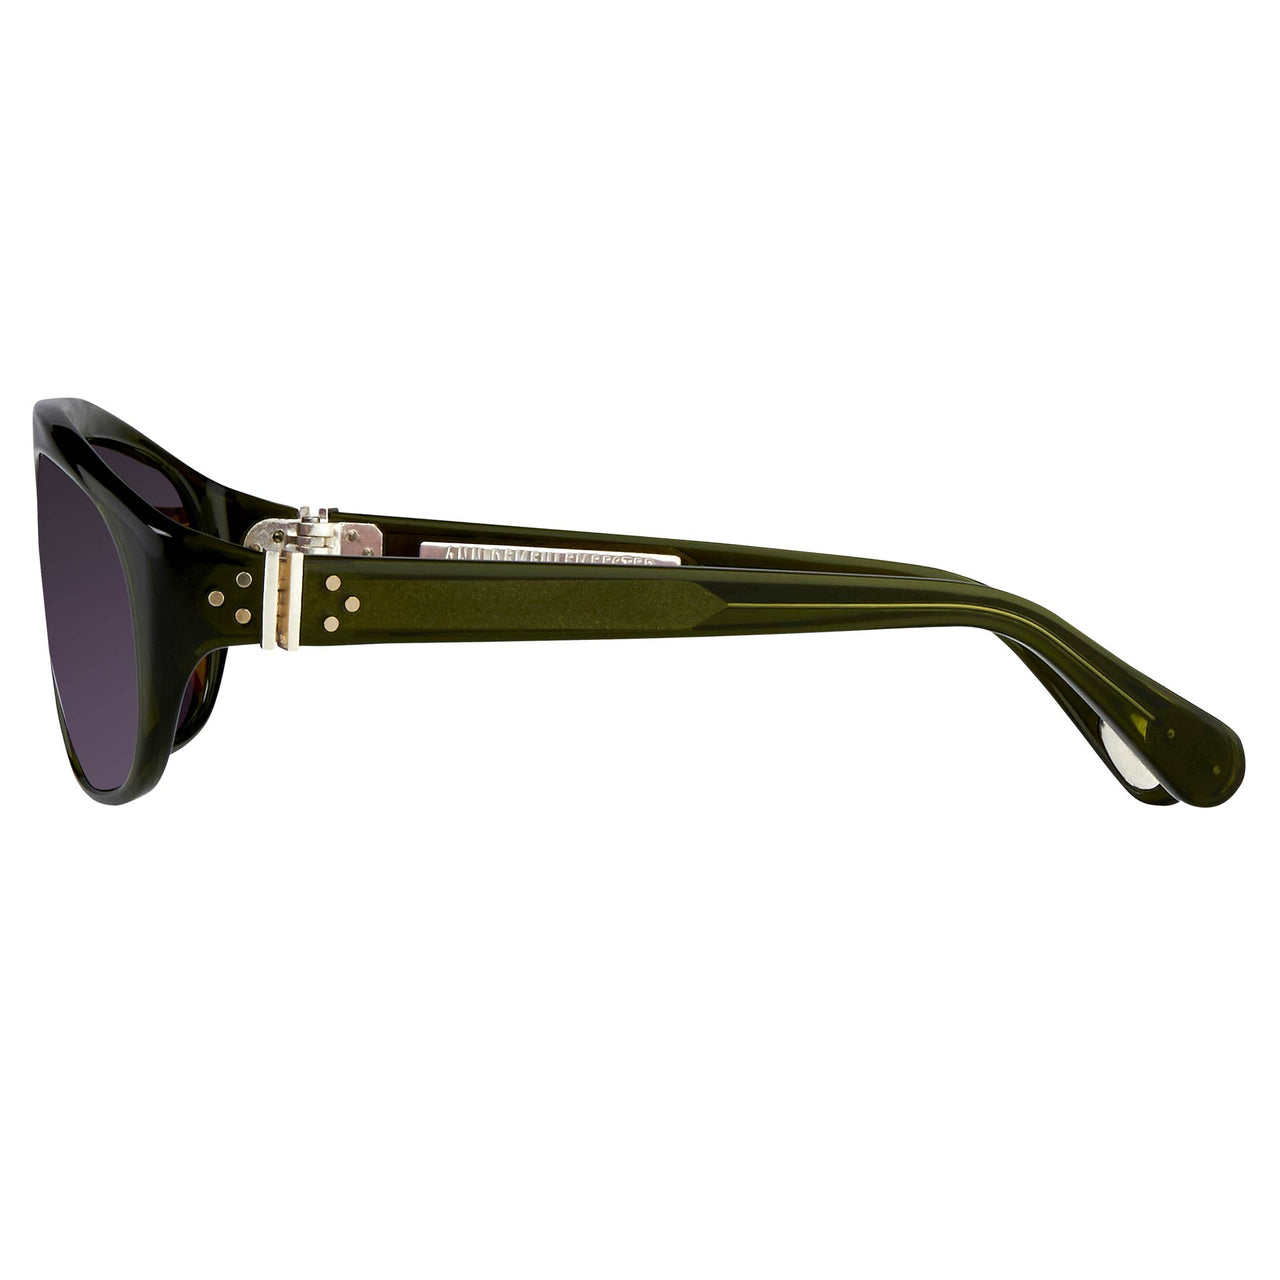 Ann Demeulemeester Sunglasses Flat Top Green 925 Silver with Purple Lenses Category 3 Dark Tint AD1C7SUN - Watches & Crystals